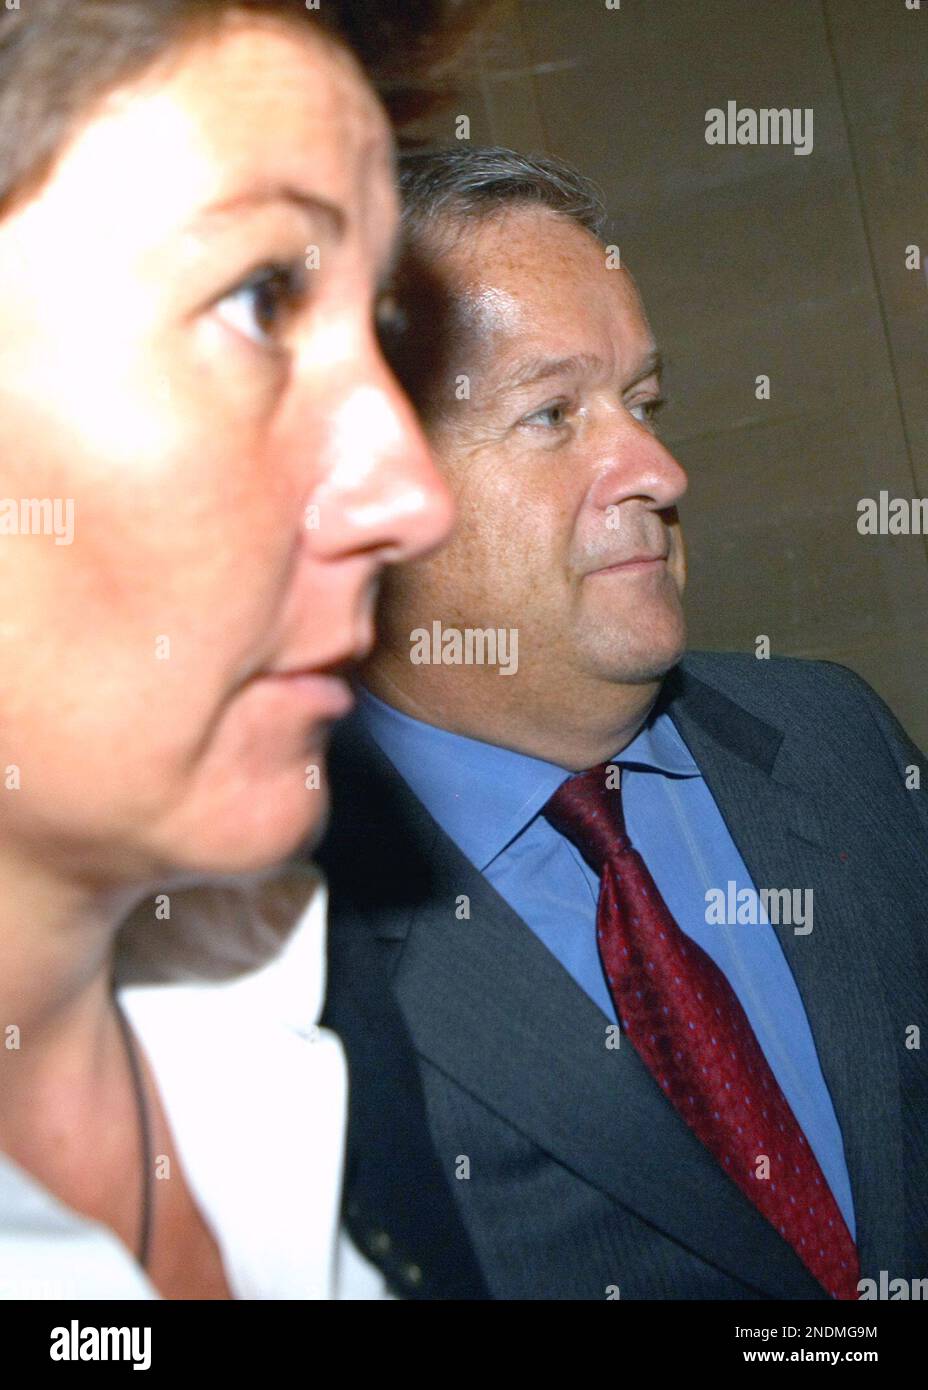 Jean Marie messier, former chairman and CEO of French conglomerate then  Vivendi International, leaves with Crystal Delaval, left, in the French  Court House in Paris Wednesday, June 2, 2010. The once-jettsetting Jean